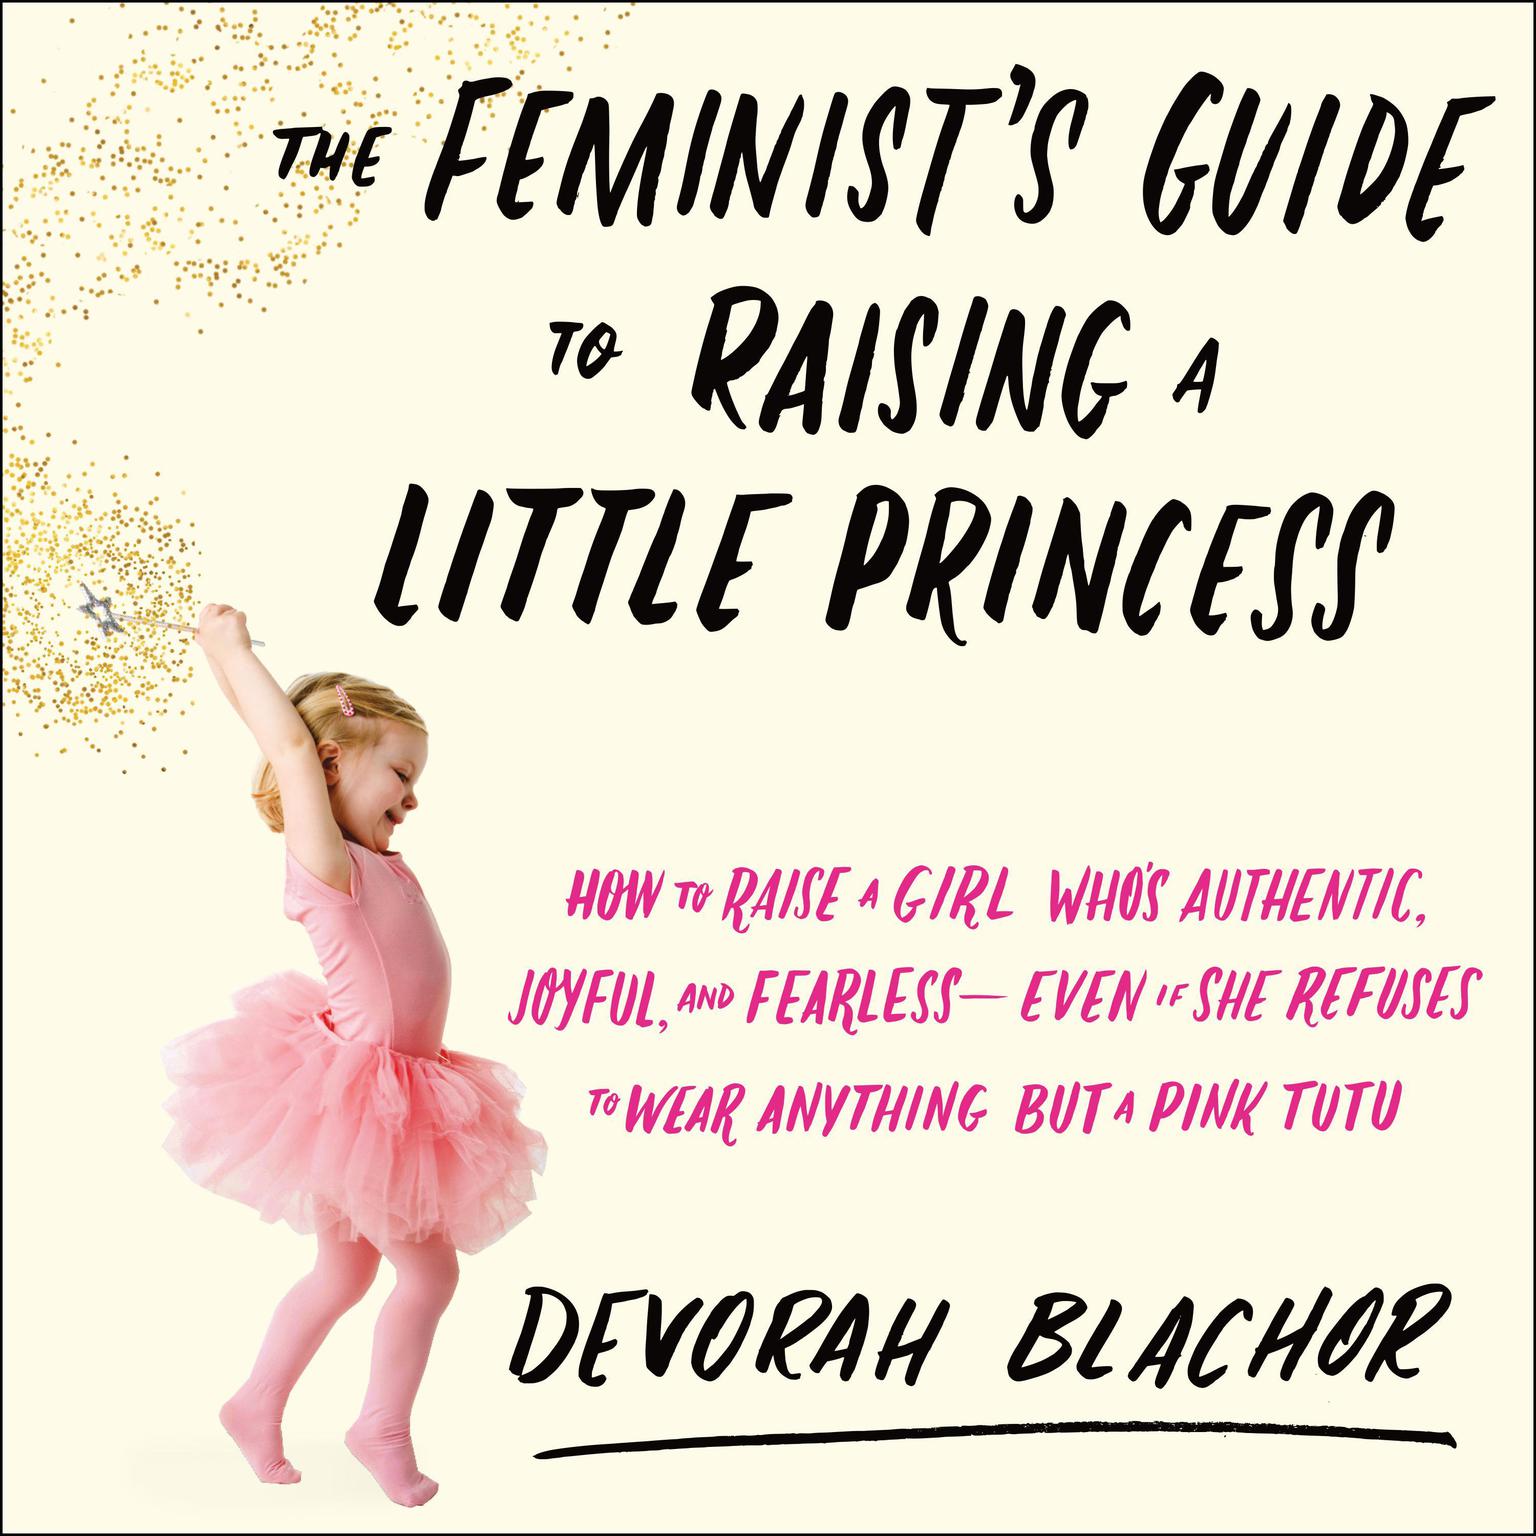 The Feminists Guide to Raising a Little Princess: How to Raise a Girl Whos Authentic, Joyful, and Fearless--Even If She Refuses to Wear Anything but a Pink Tutu Audiobook, by Devorah Blachor